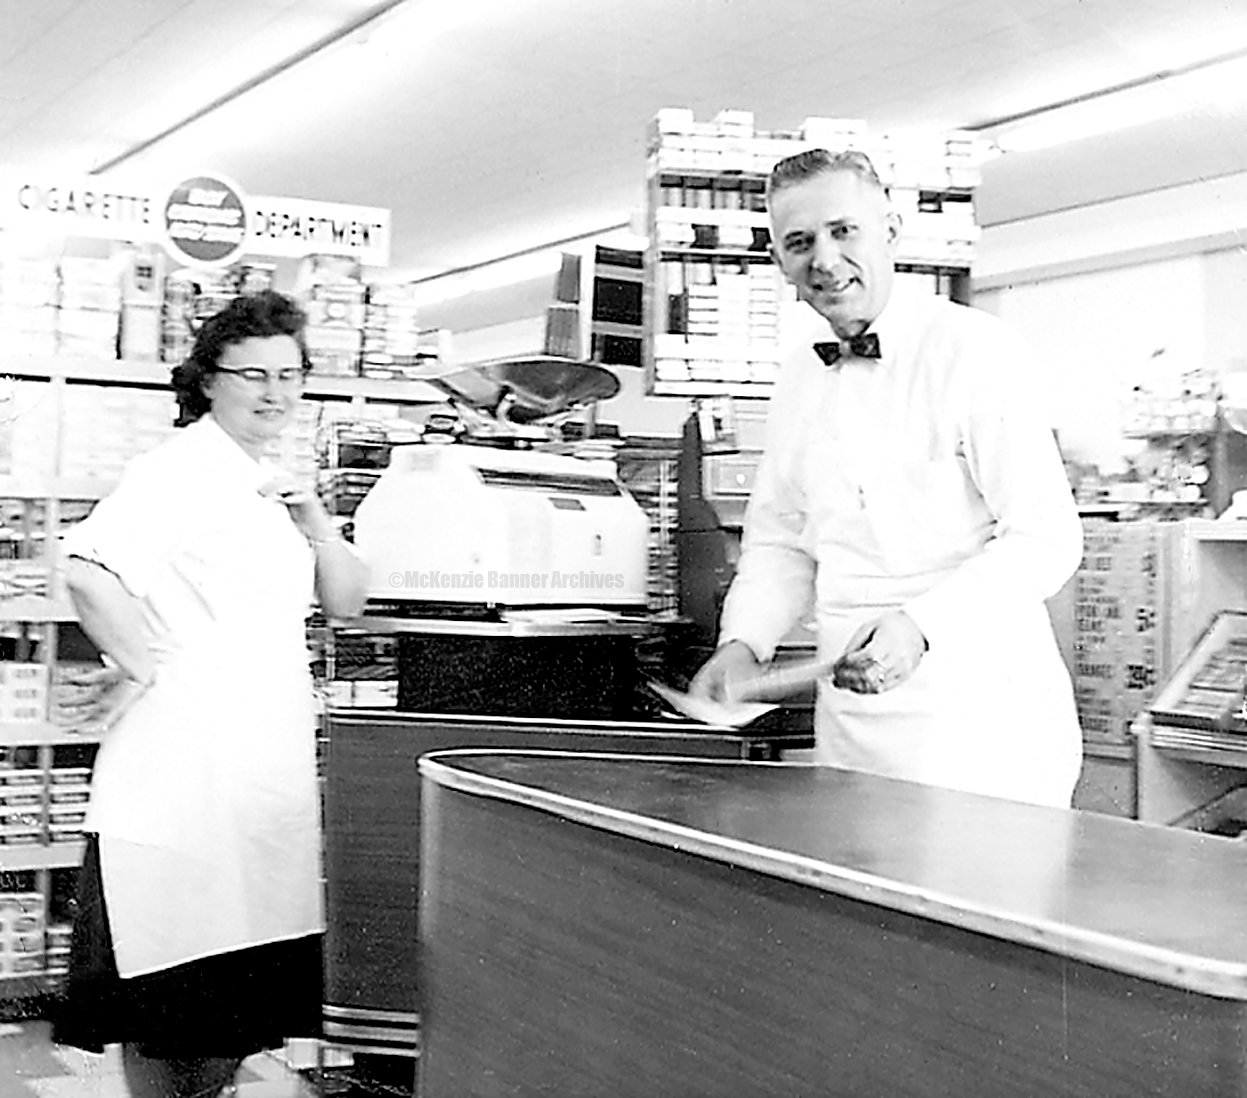 Laverne and Harris Drewry, owners of Drewry’s Food Center on Cedar St. in McKenzie. This was the first supermarket in McKenzie (1960). Harris’ brother, Jack Drewry, was a founder of the store along with Laverne and Harris. They later bought out his ownership.